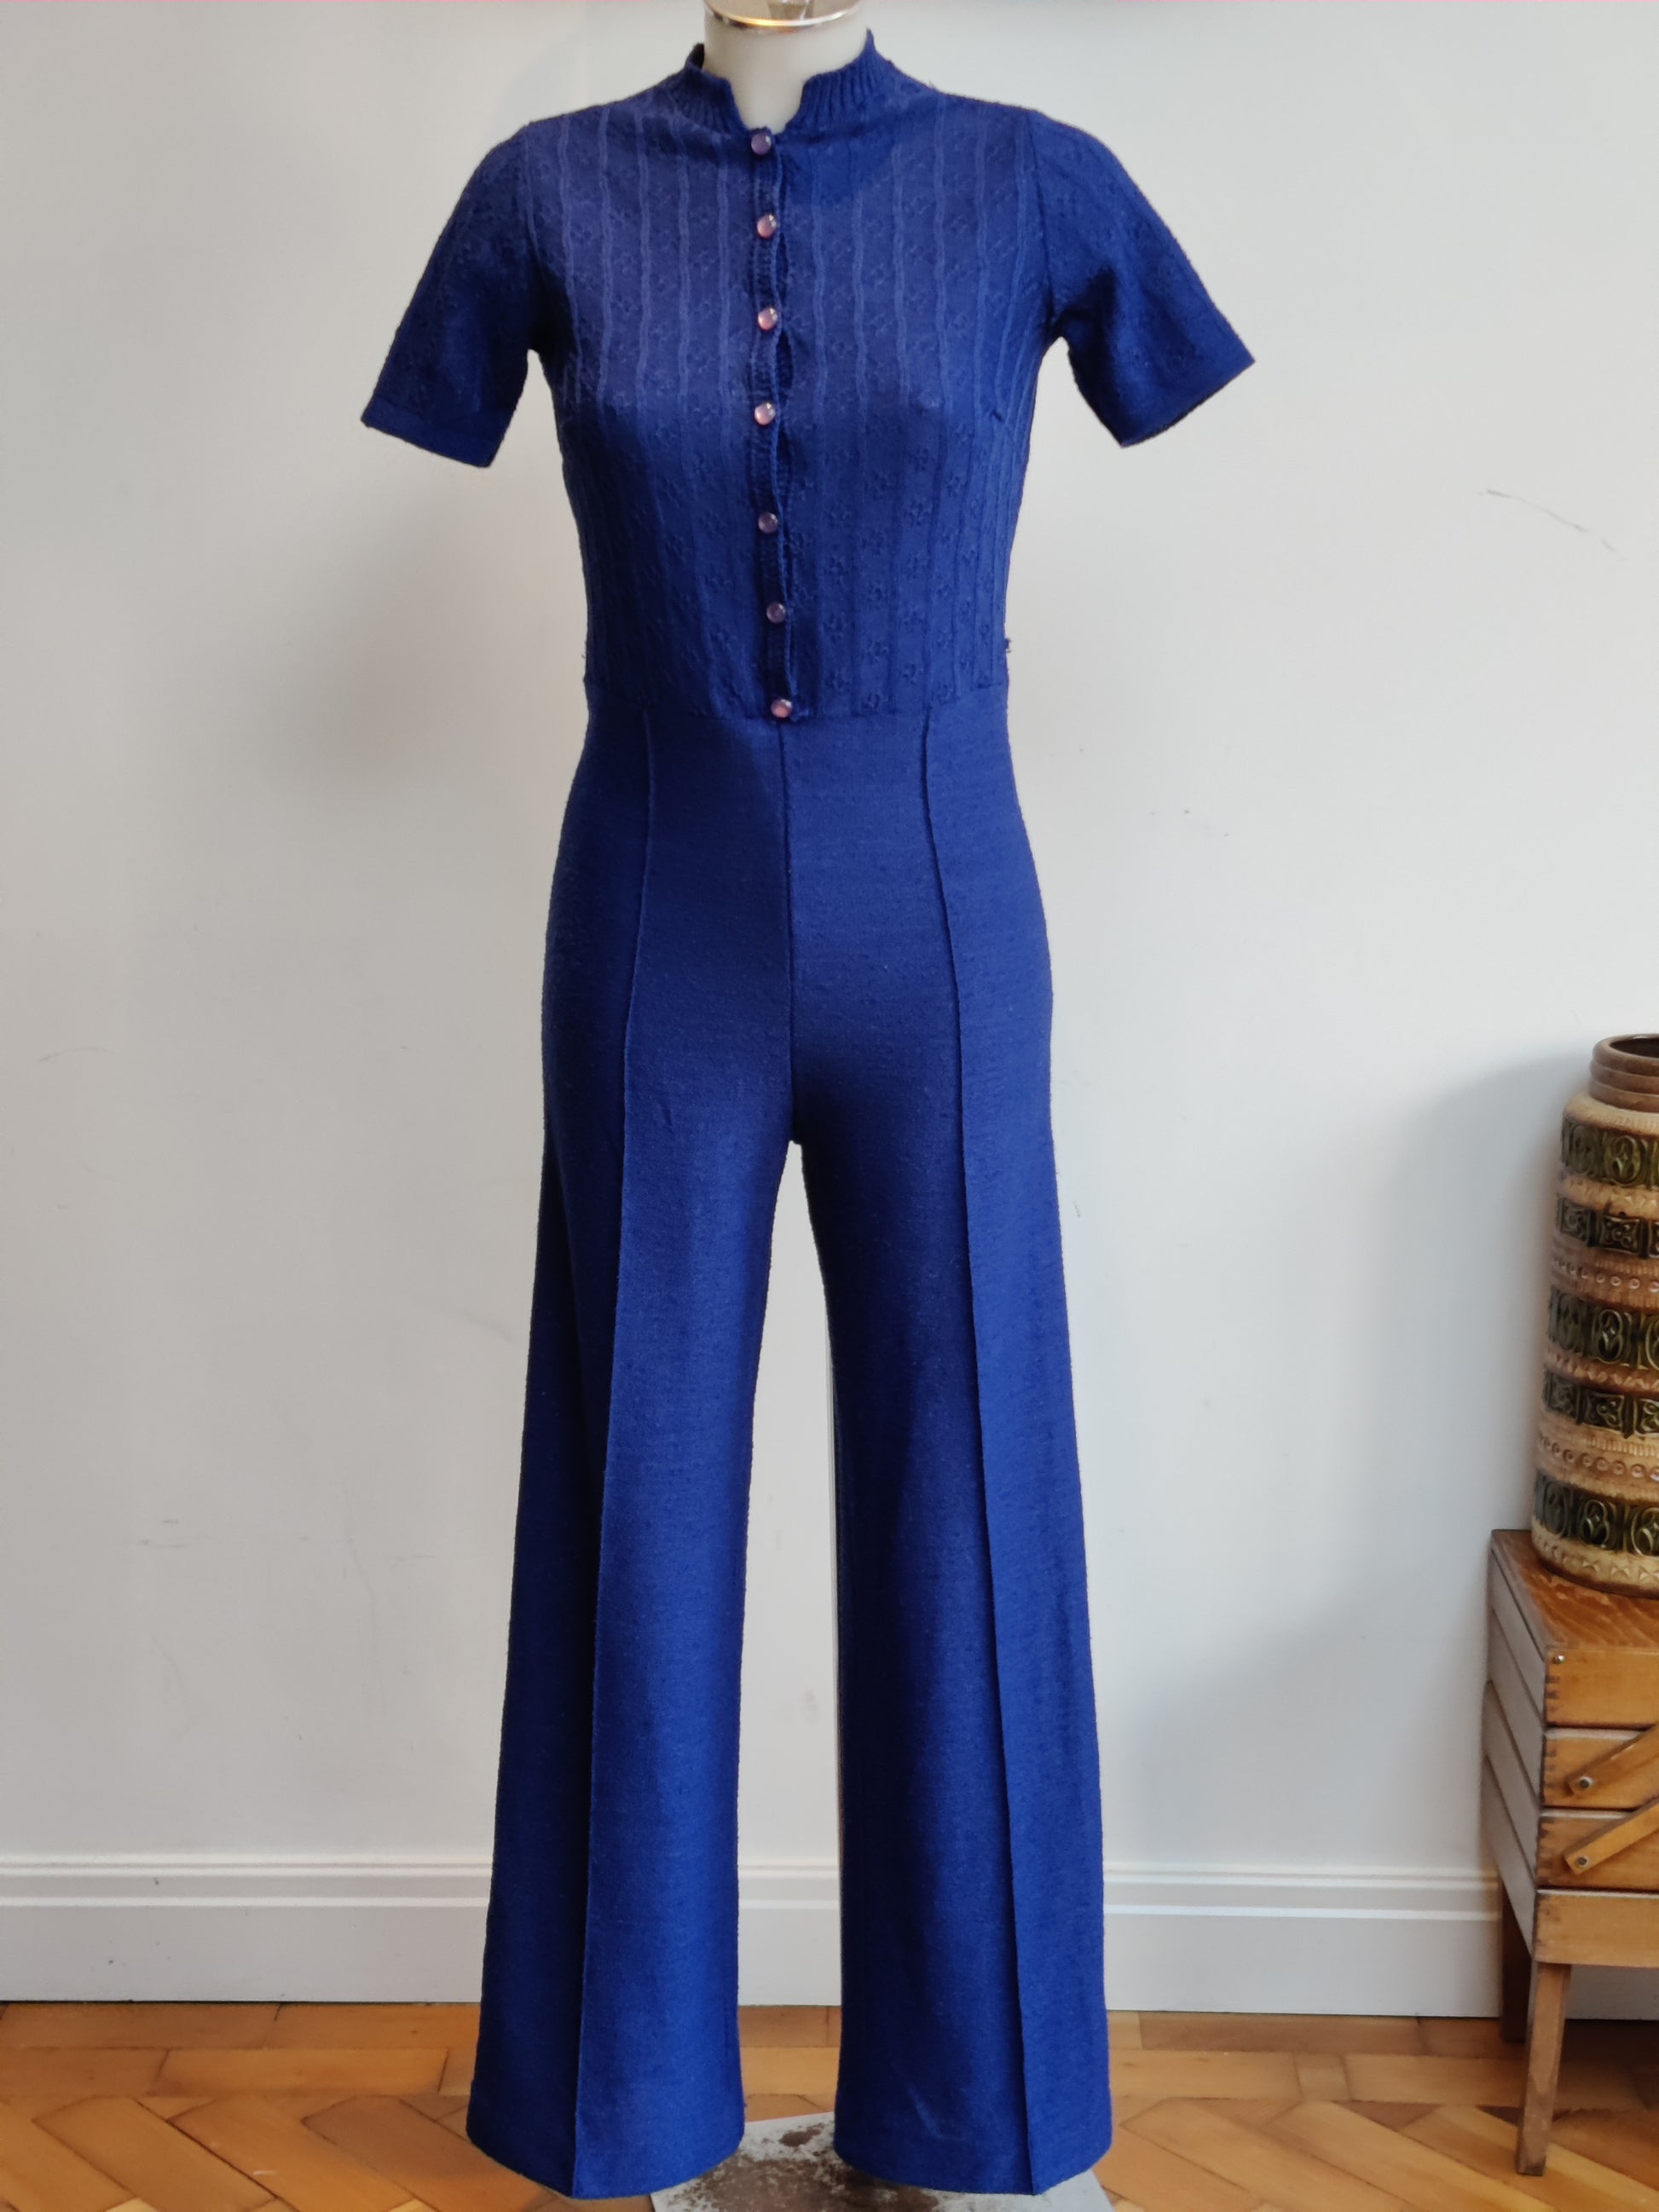 Incredible blue knitted jumpsuit